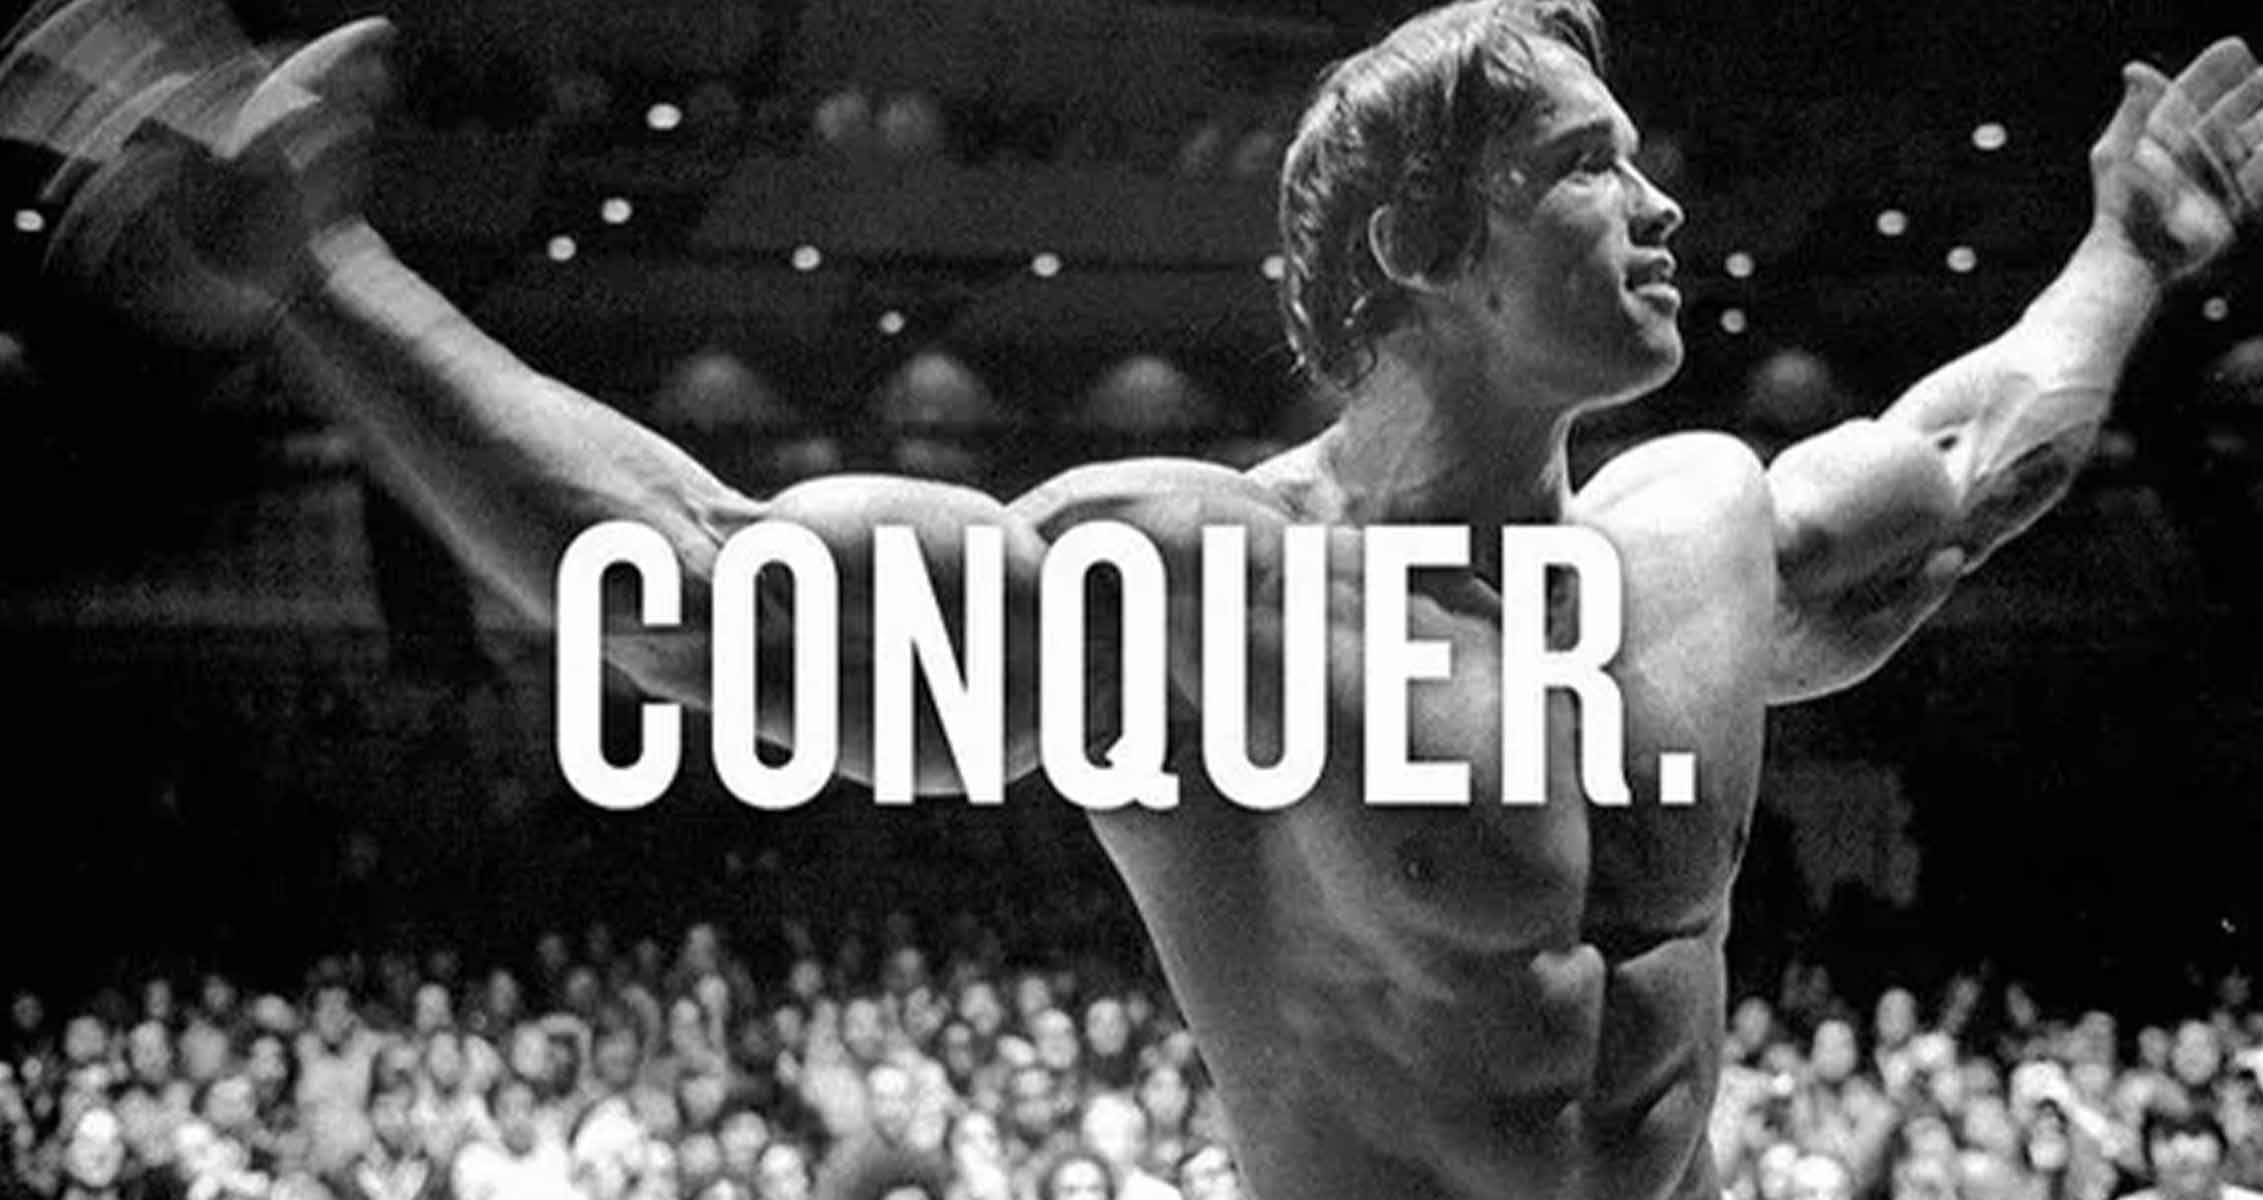 bodybuilding quotes and sayings